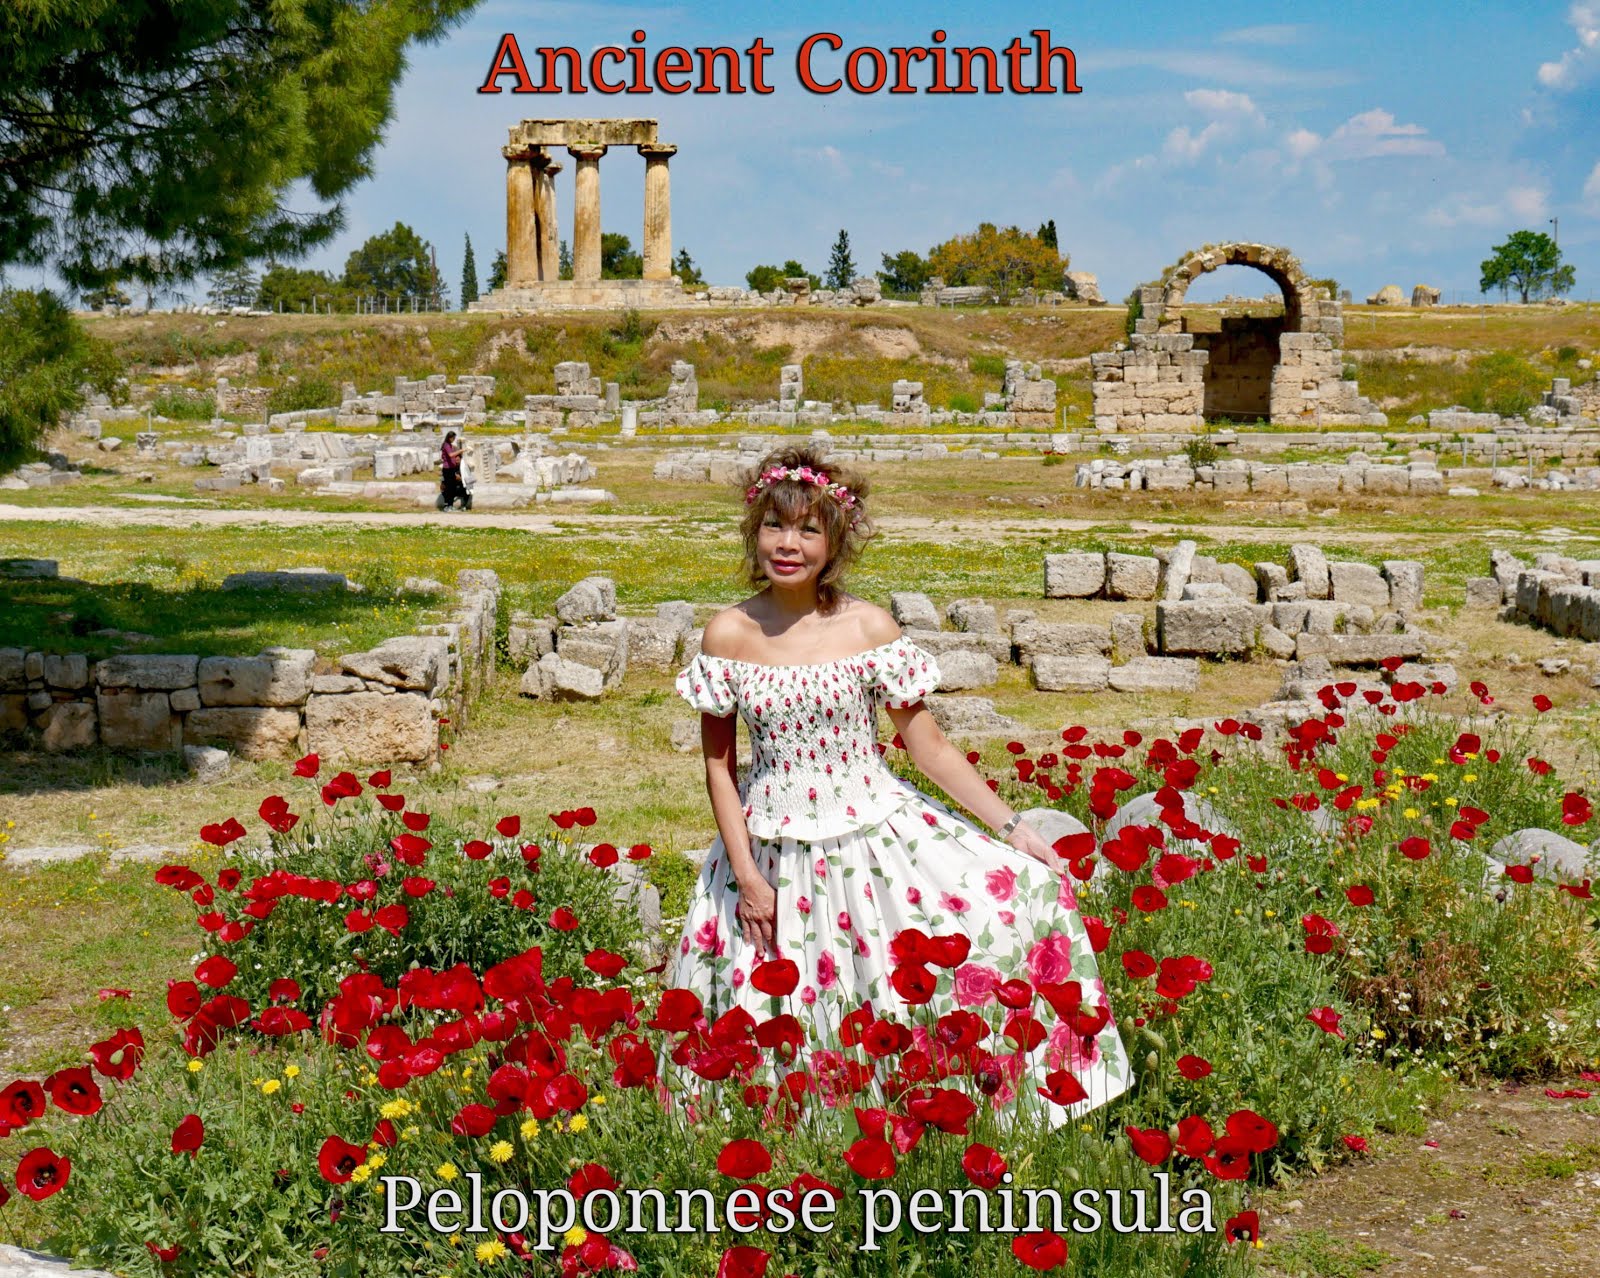 Spring in Ancient Corinth